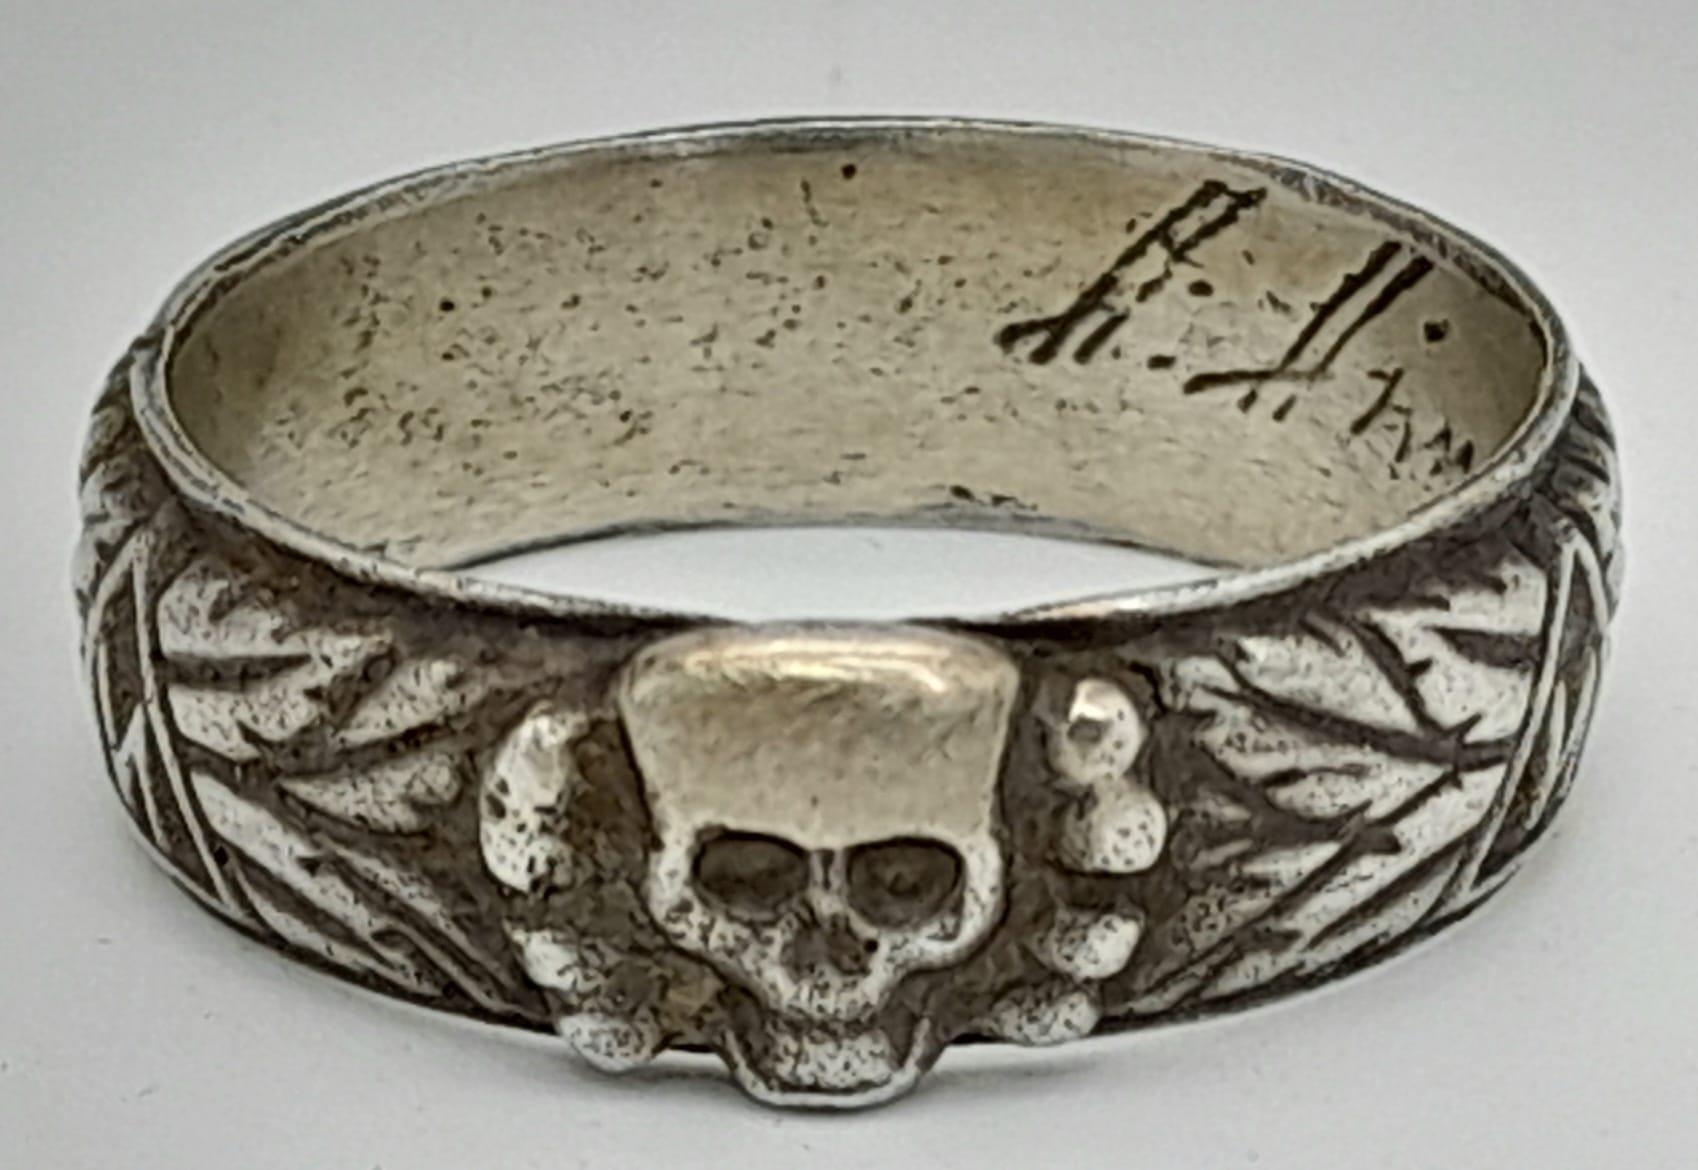 WW2 Period German Silver Skull Tote Ring with Inscription on Inner Shank Size Z+1. 9.06 Grams